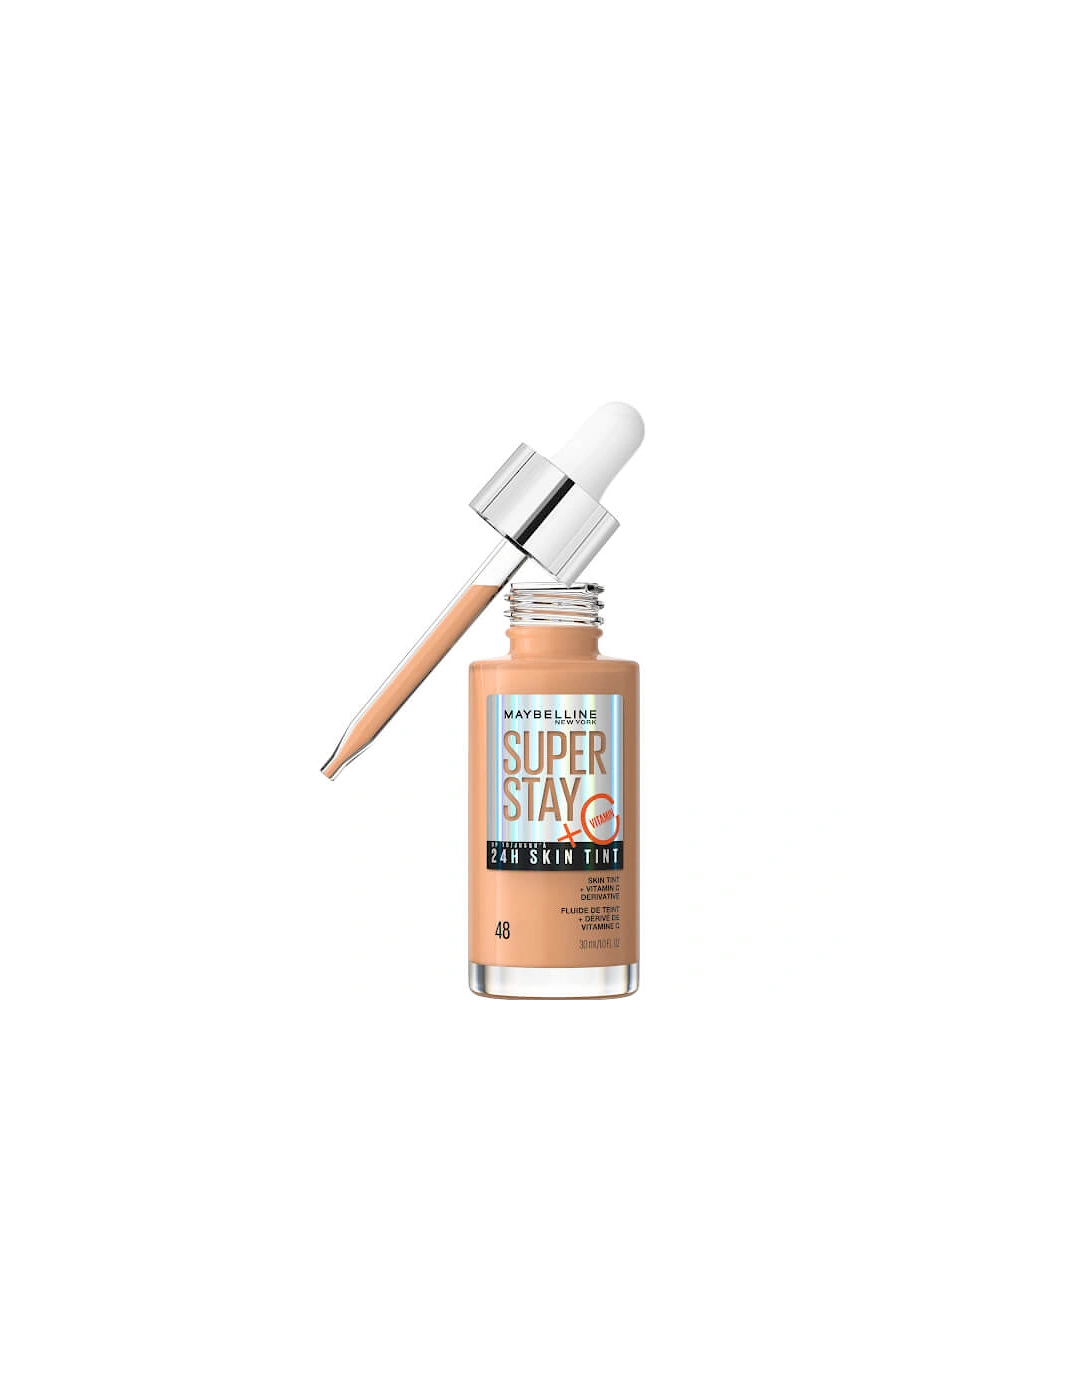 Super Stay up to 24H Skin Tint Foundation + Vitamin C - Shade 48, 2 of 1